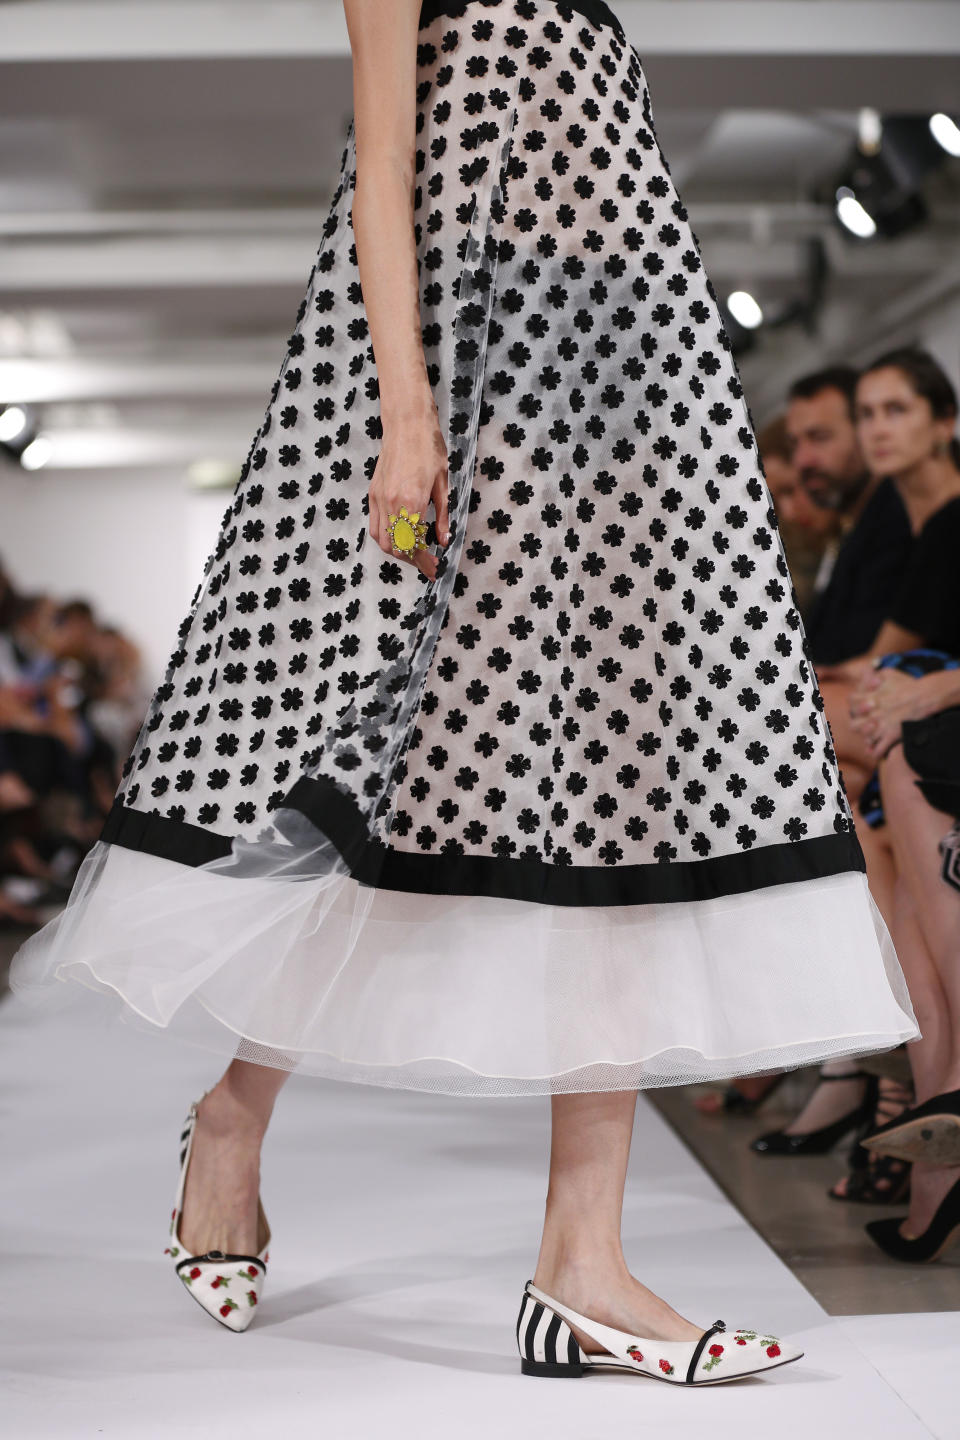 The Oscar de la Renta Spring 2014 collection is modeled during Fashion Week in New York, Tuesday, Sept. 10, 2013. (AP Photo/John Minchillo)